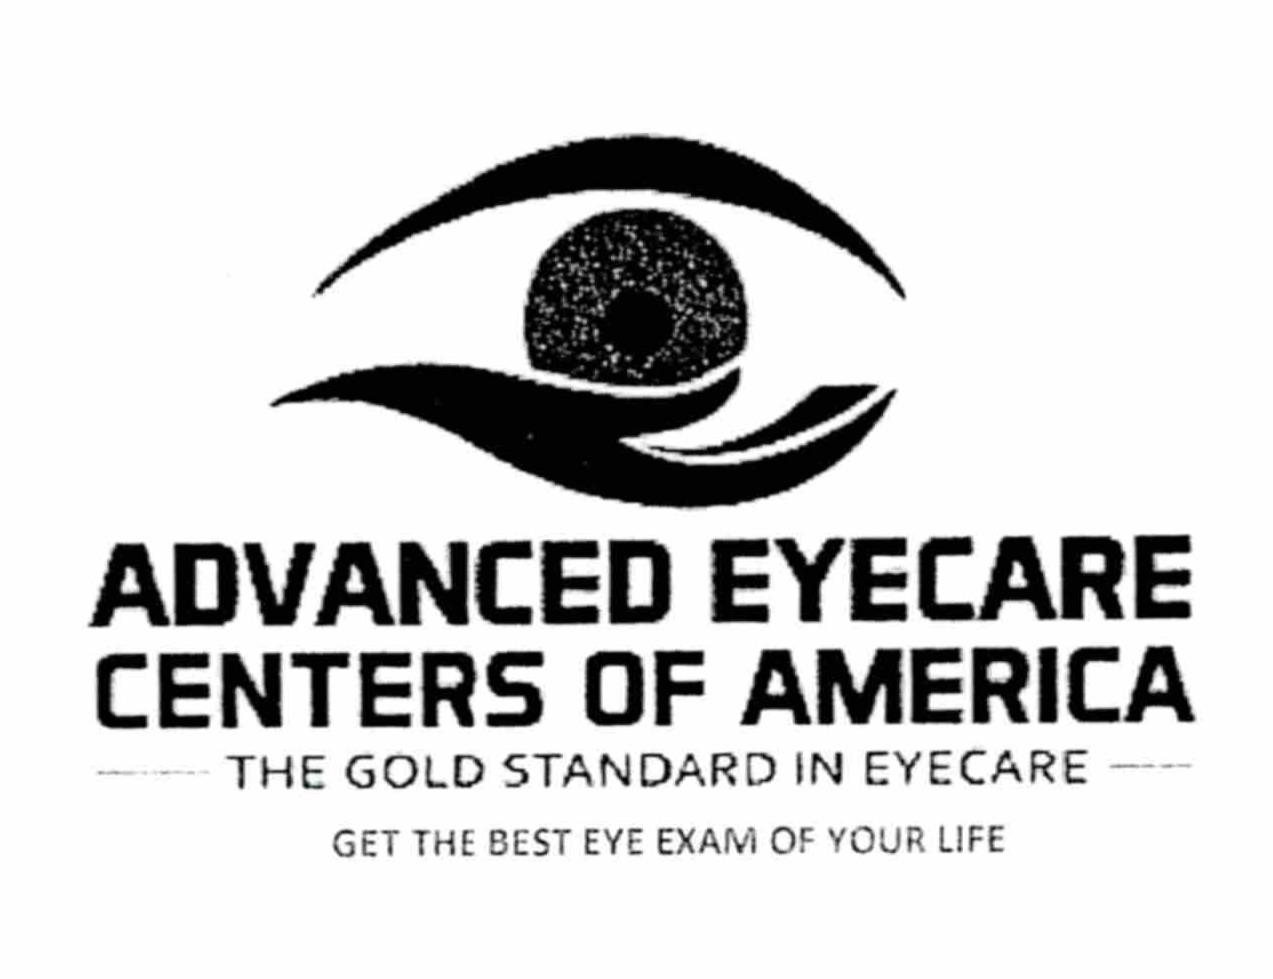  ADVANCED EYECARE CENTERS OF AMERICA THE GOLD STANDARD IN EYECARE GET THE BEST EYE EXAM OF YOUR LIFE